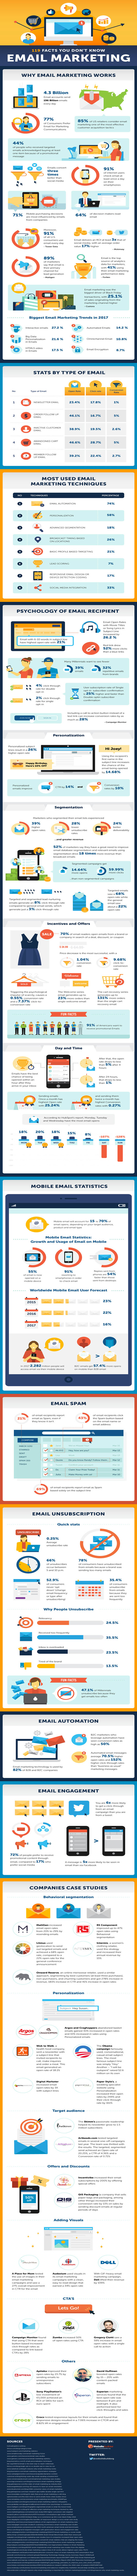 119 Facts You Don’t Know About Email Marketing